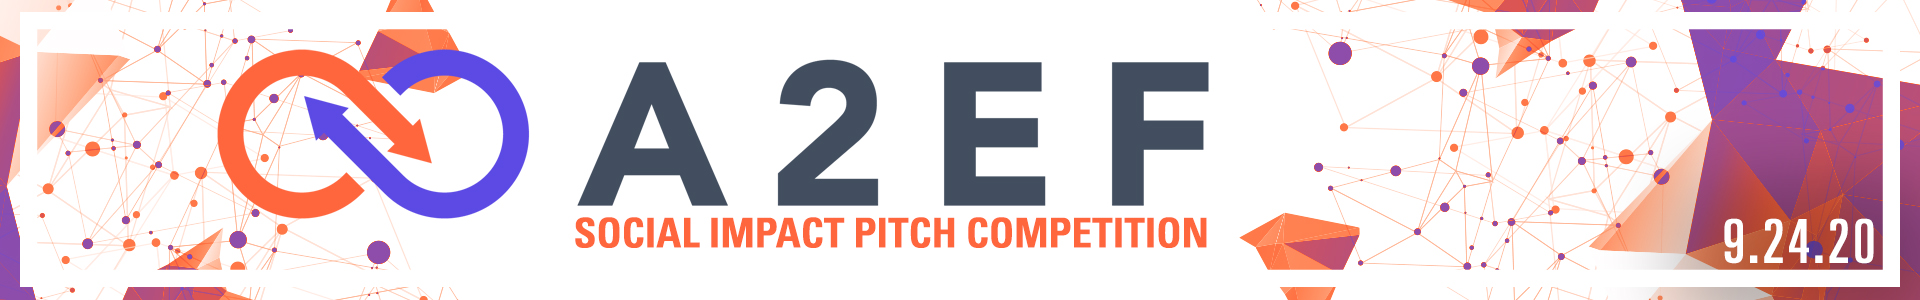 A2EF Social Impact Pitch Competition